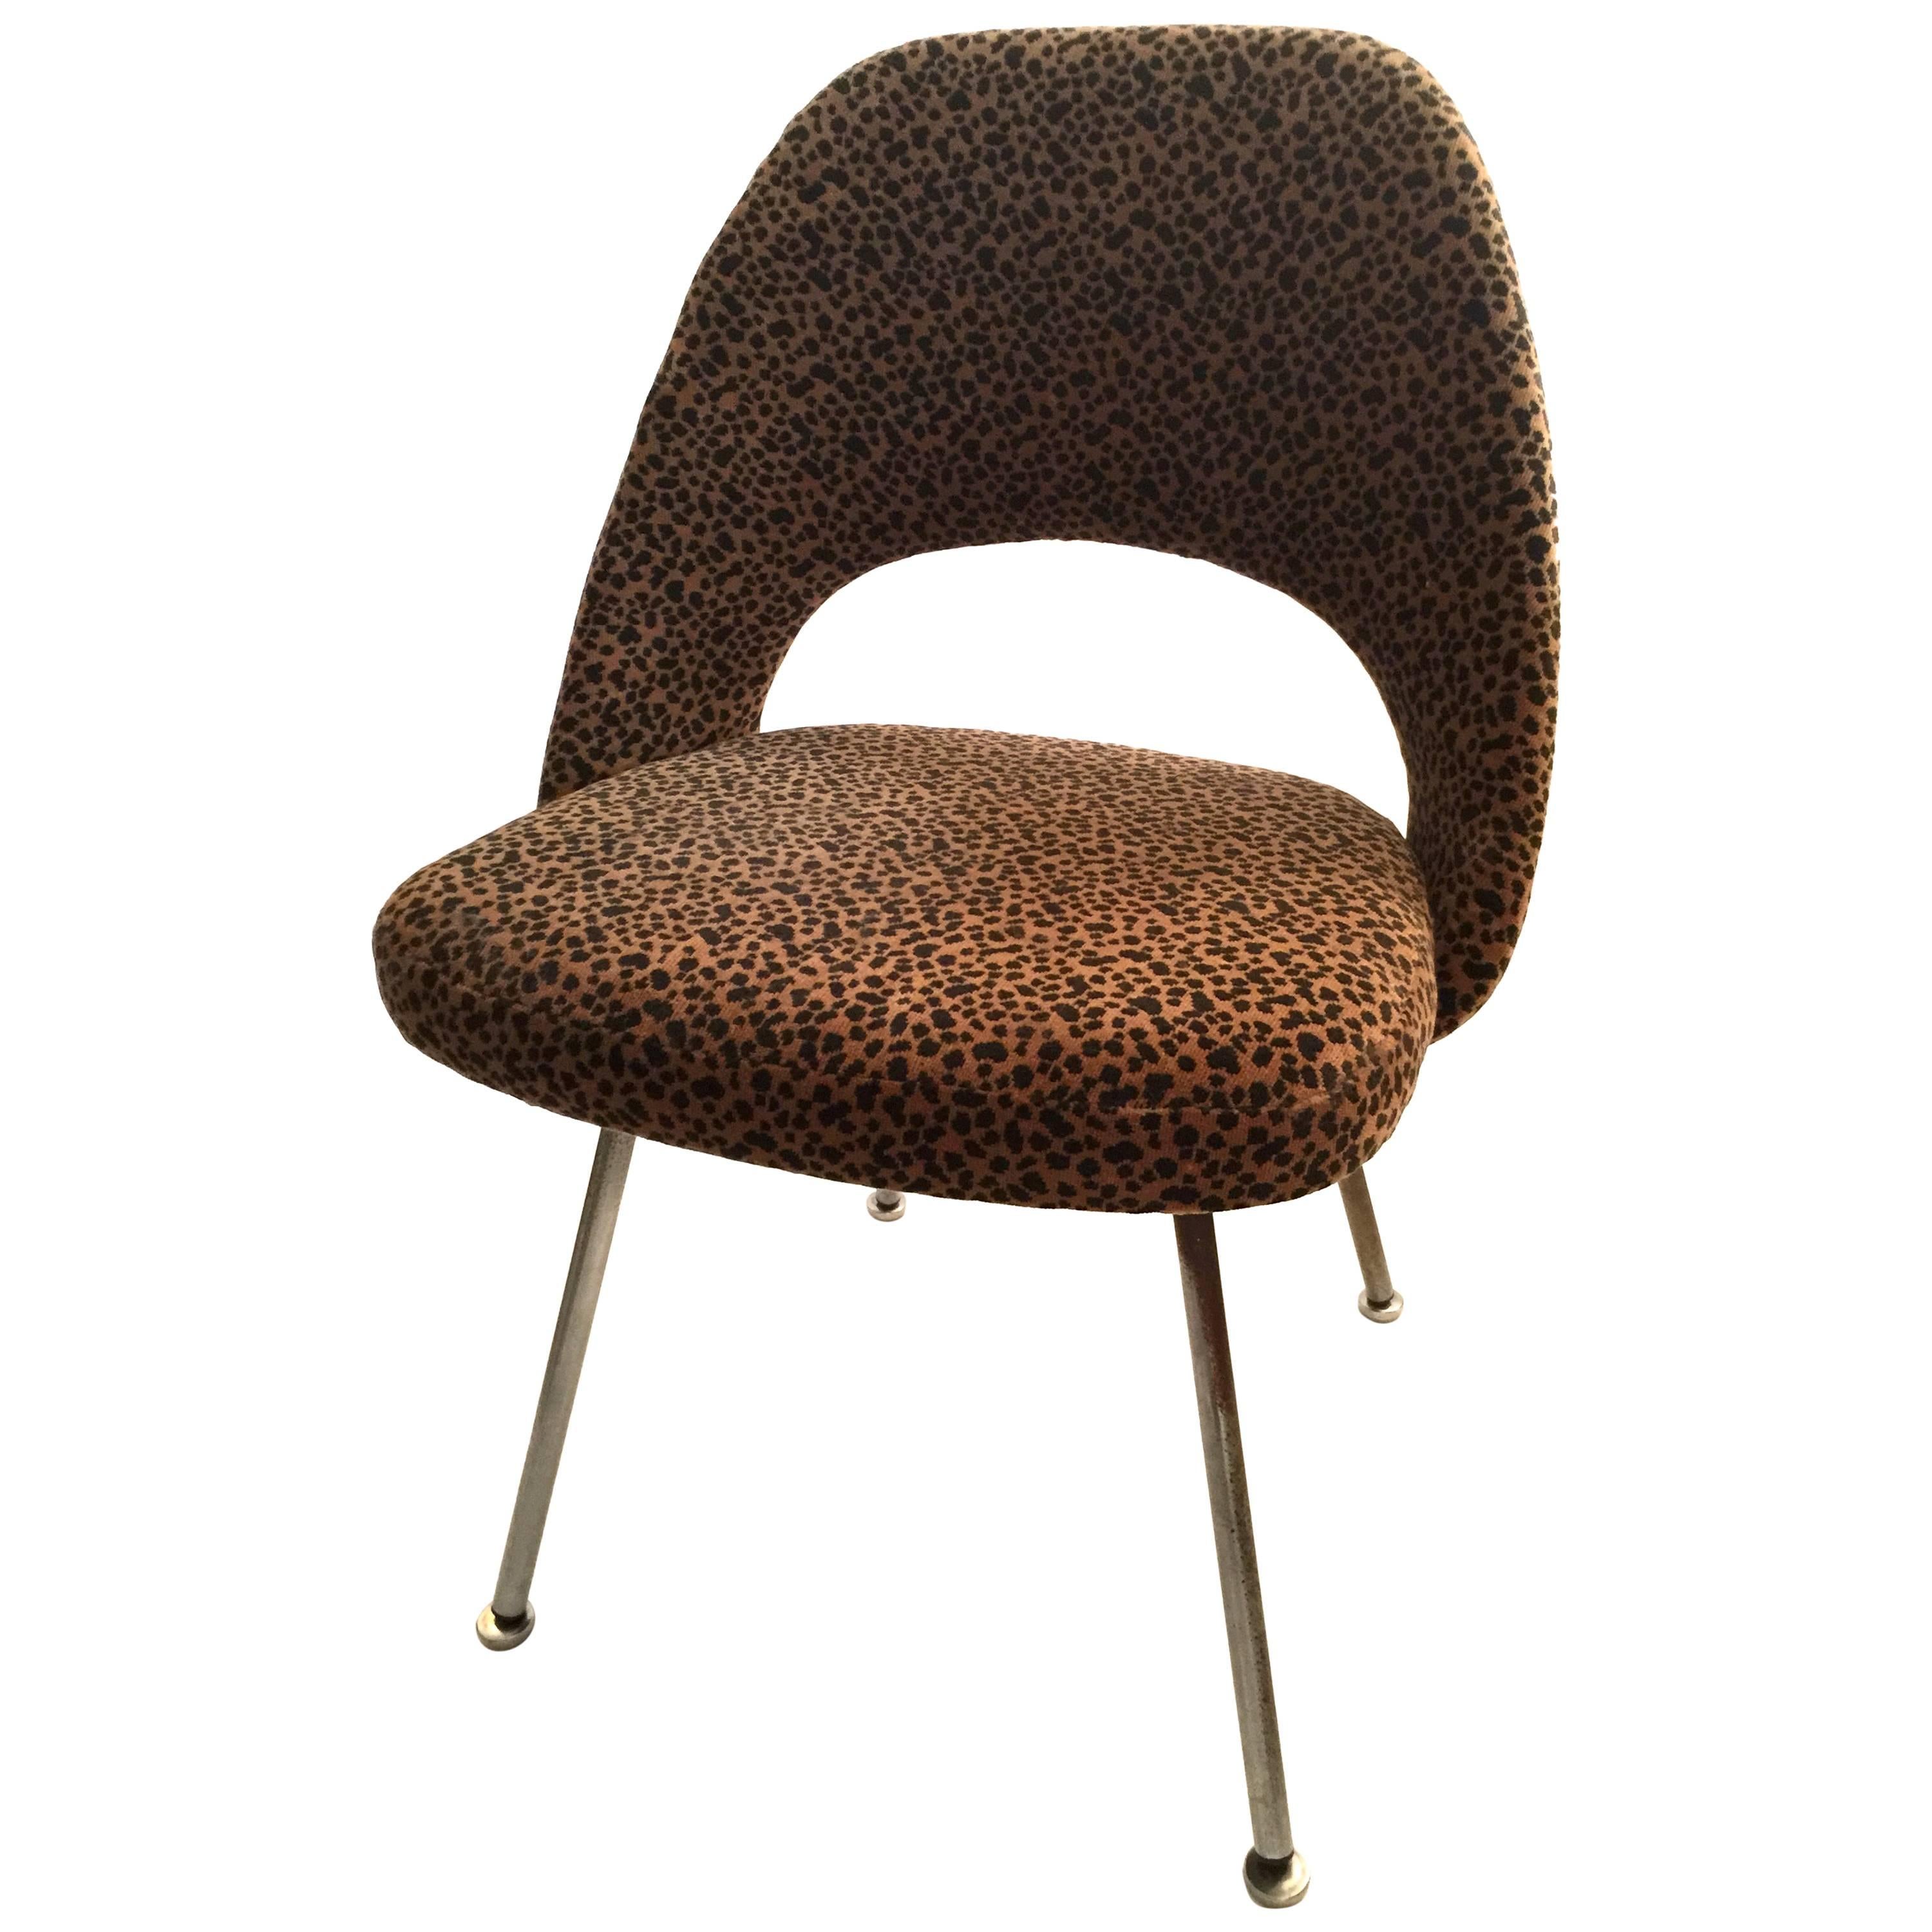 Vintage Saarinen Side Chair with Leopard Upholstery For Sale